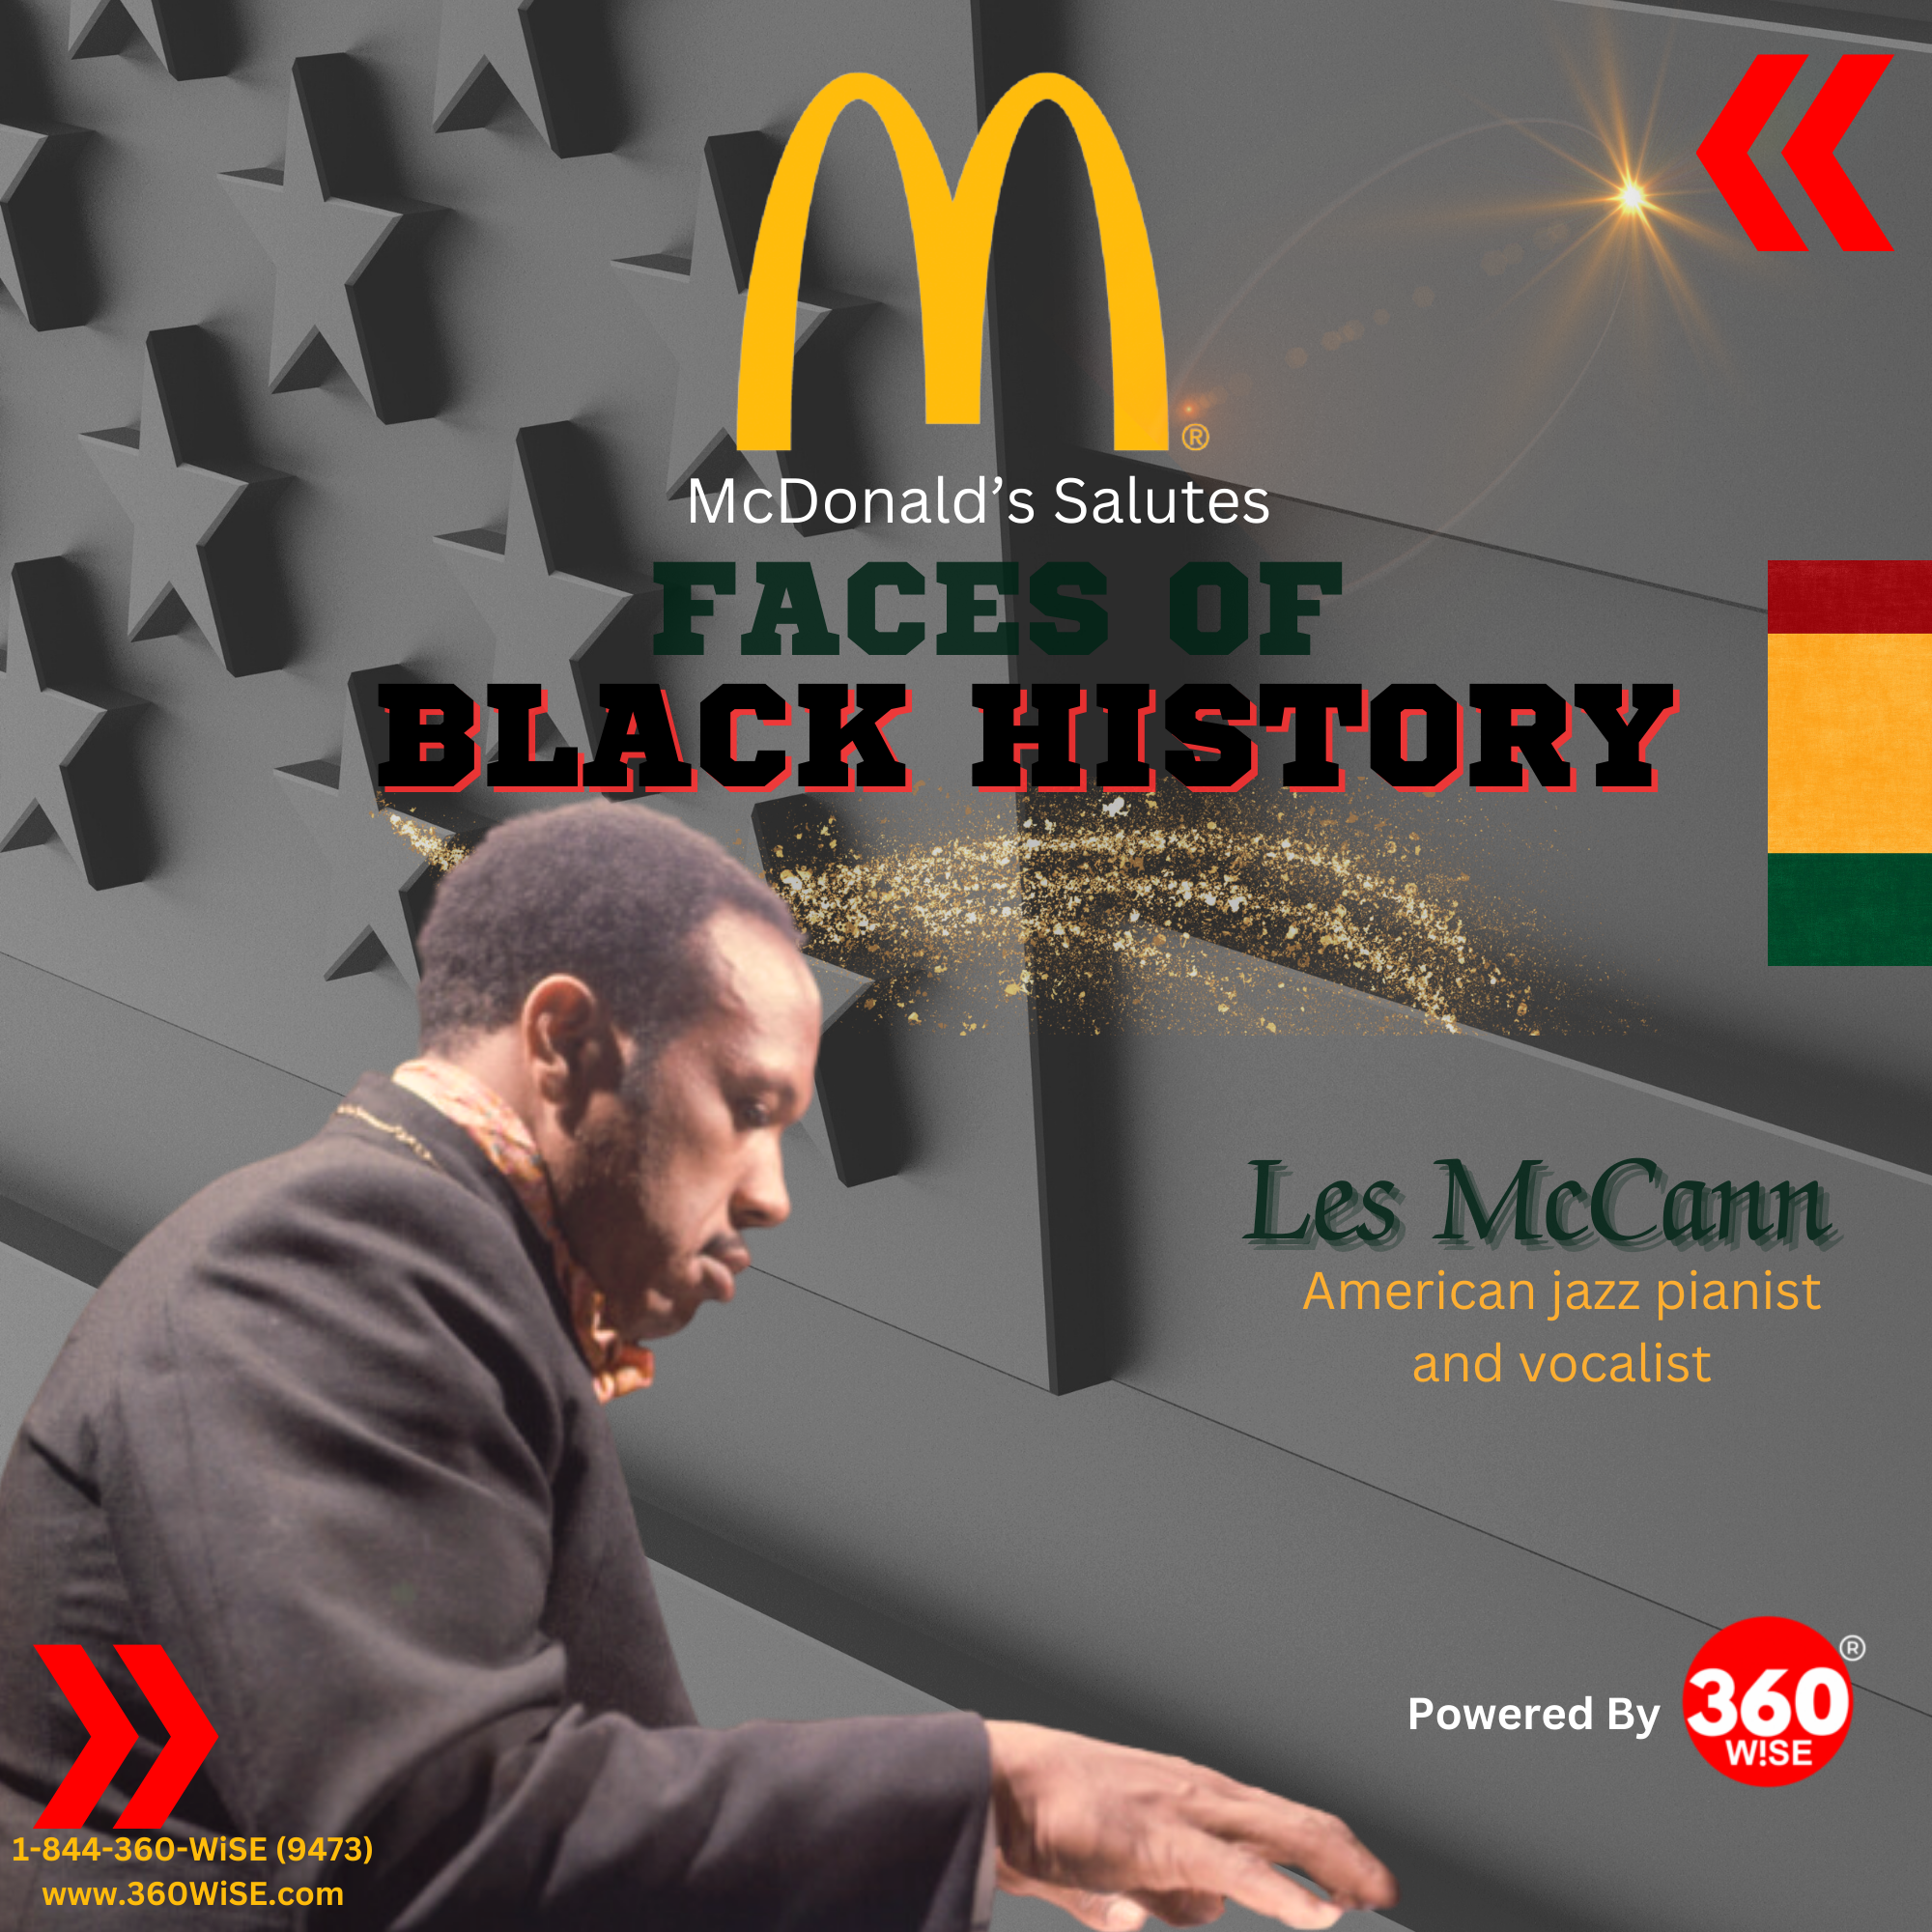 McDonald's Faces of Black History Salutes Les McCann. Powered by 360WiSE